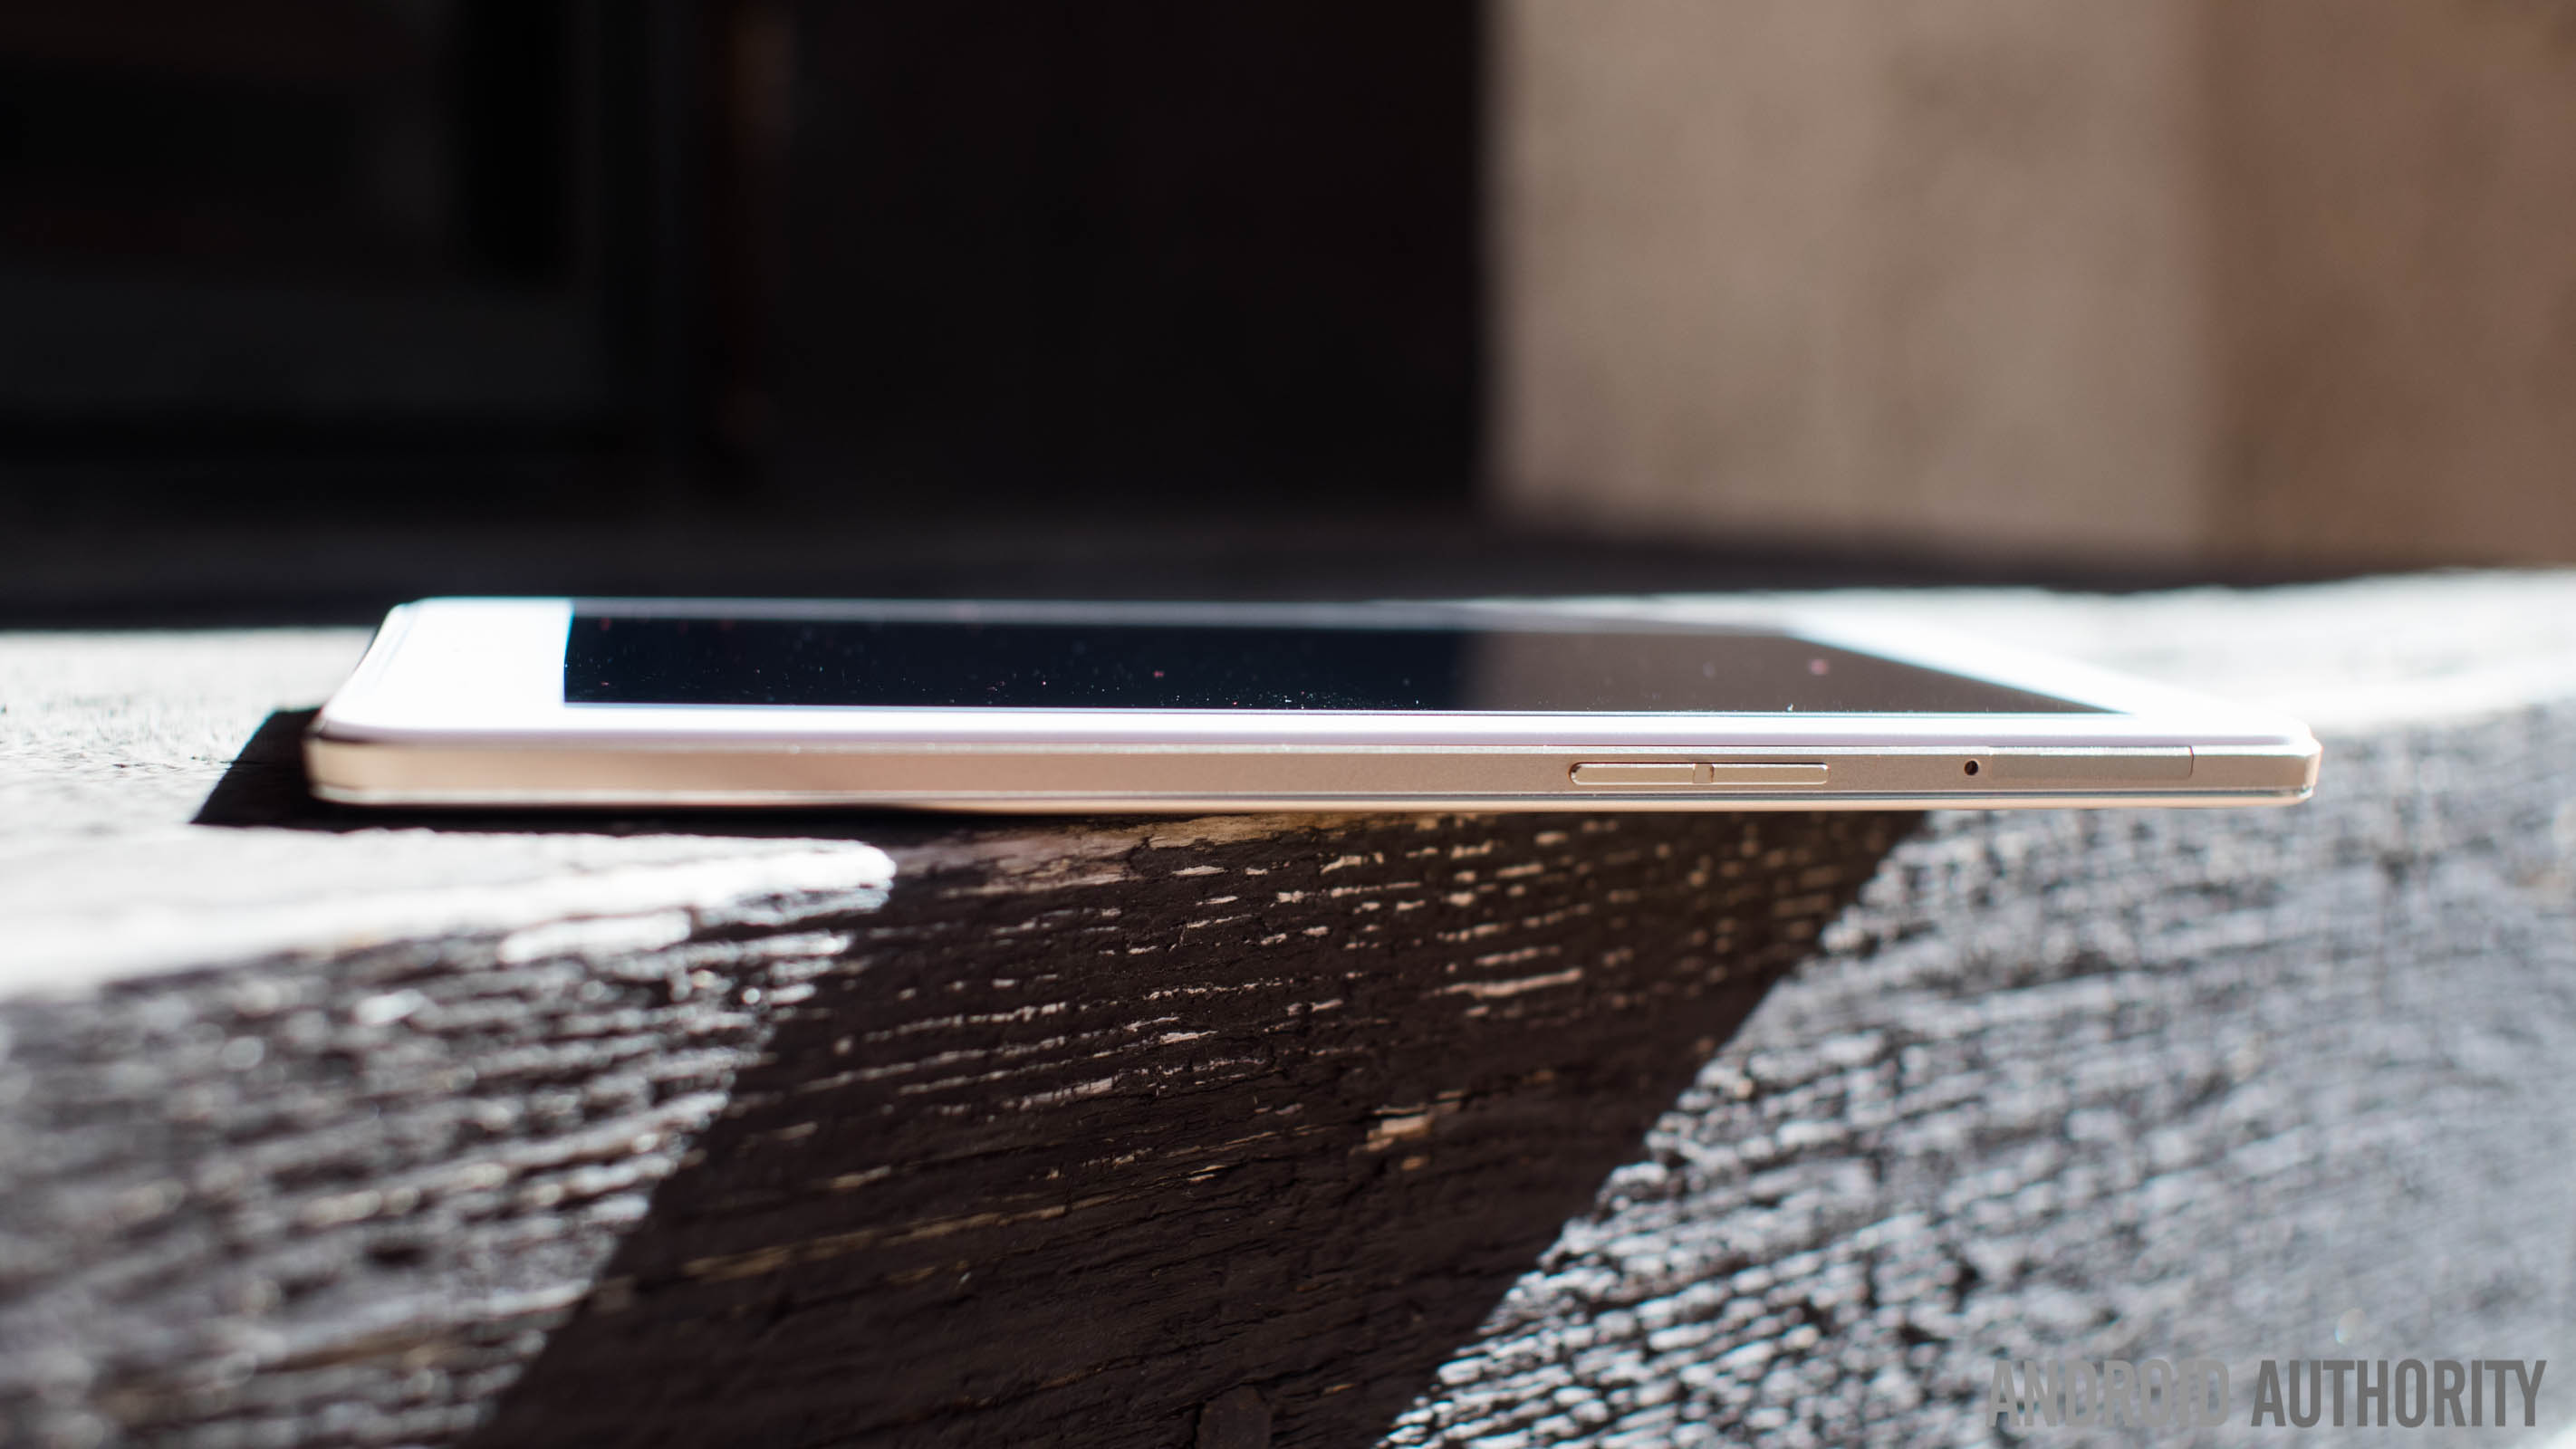 oppo r7 review aa (14 of 21)